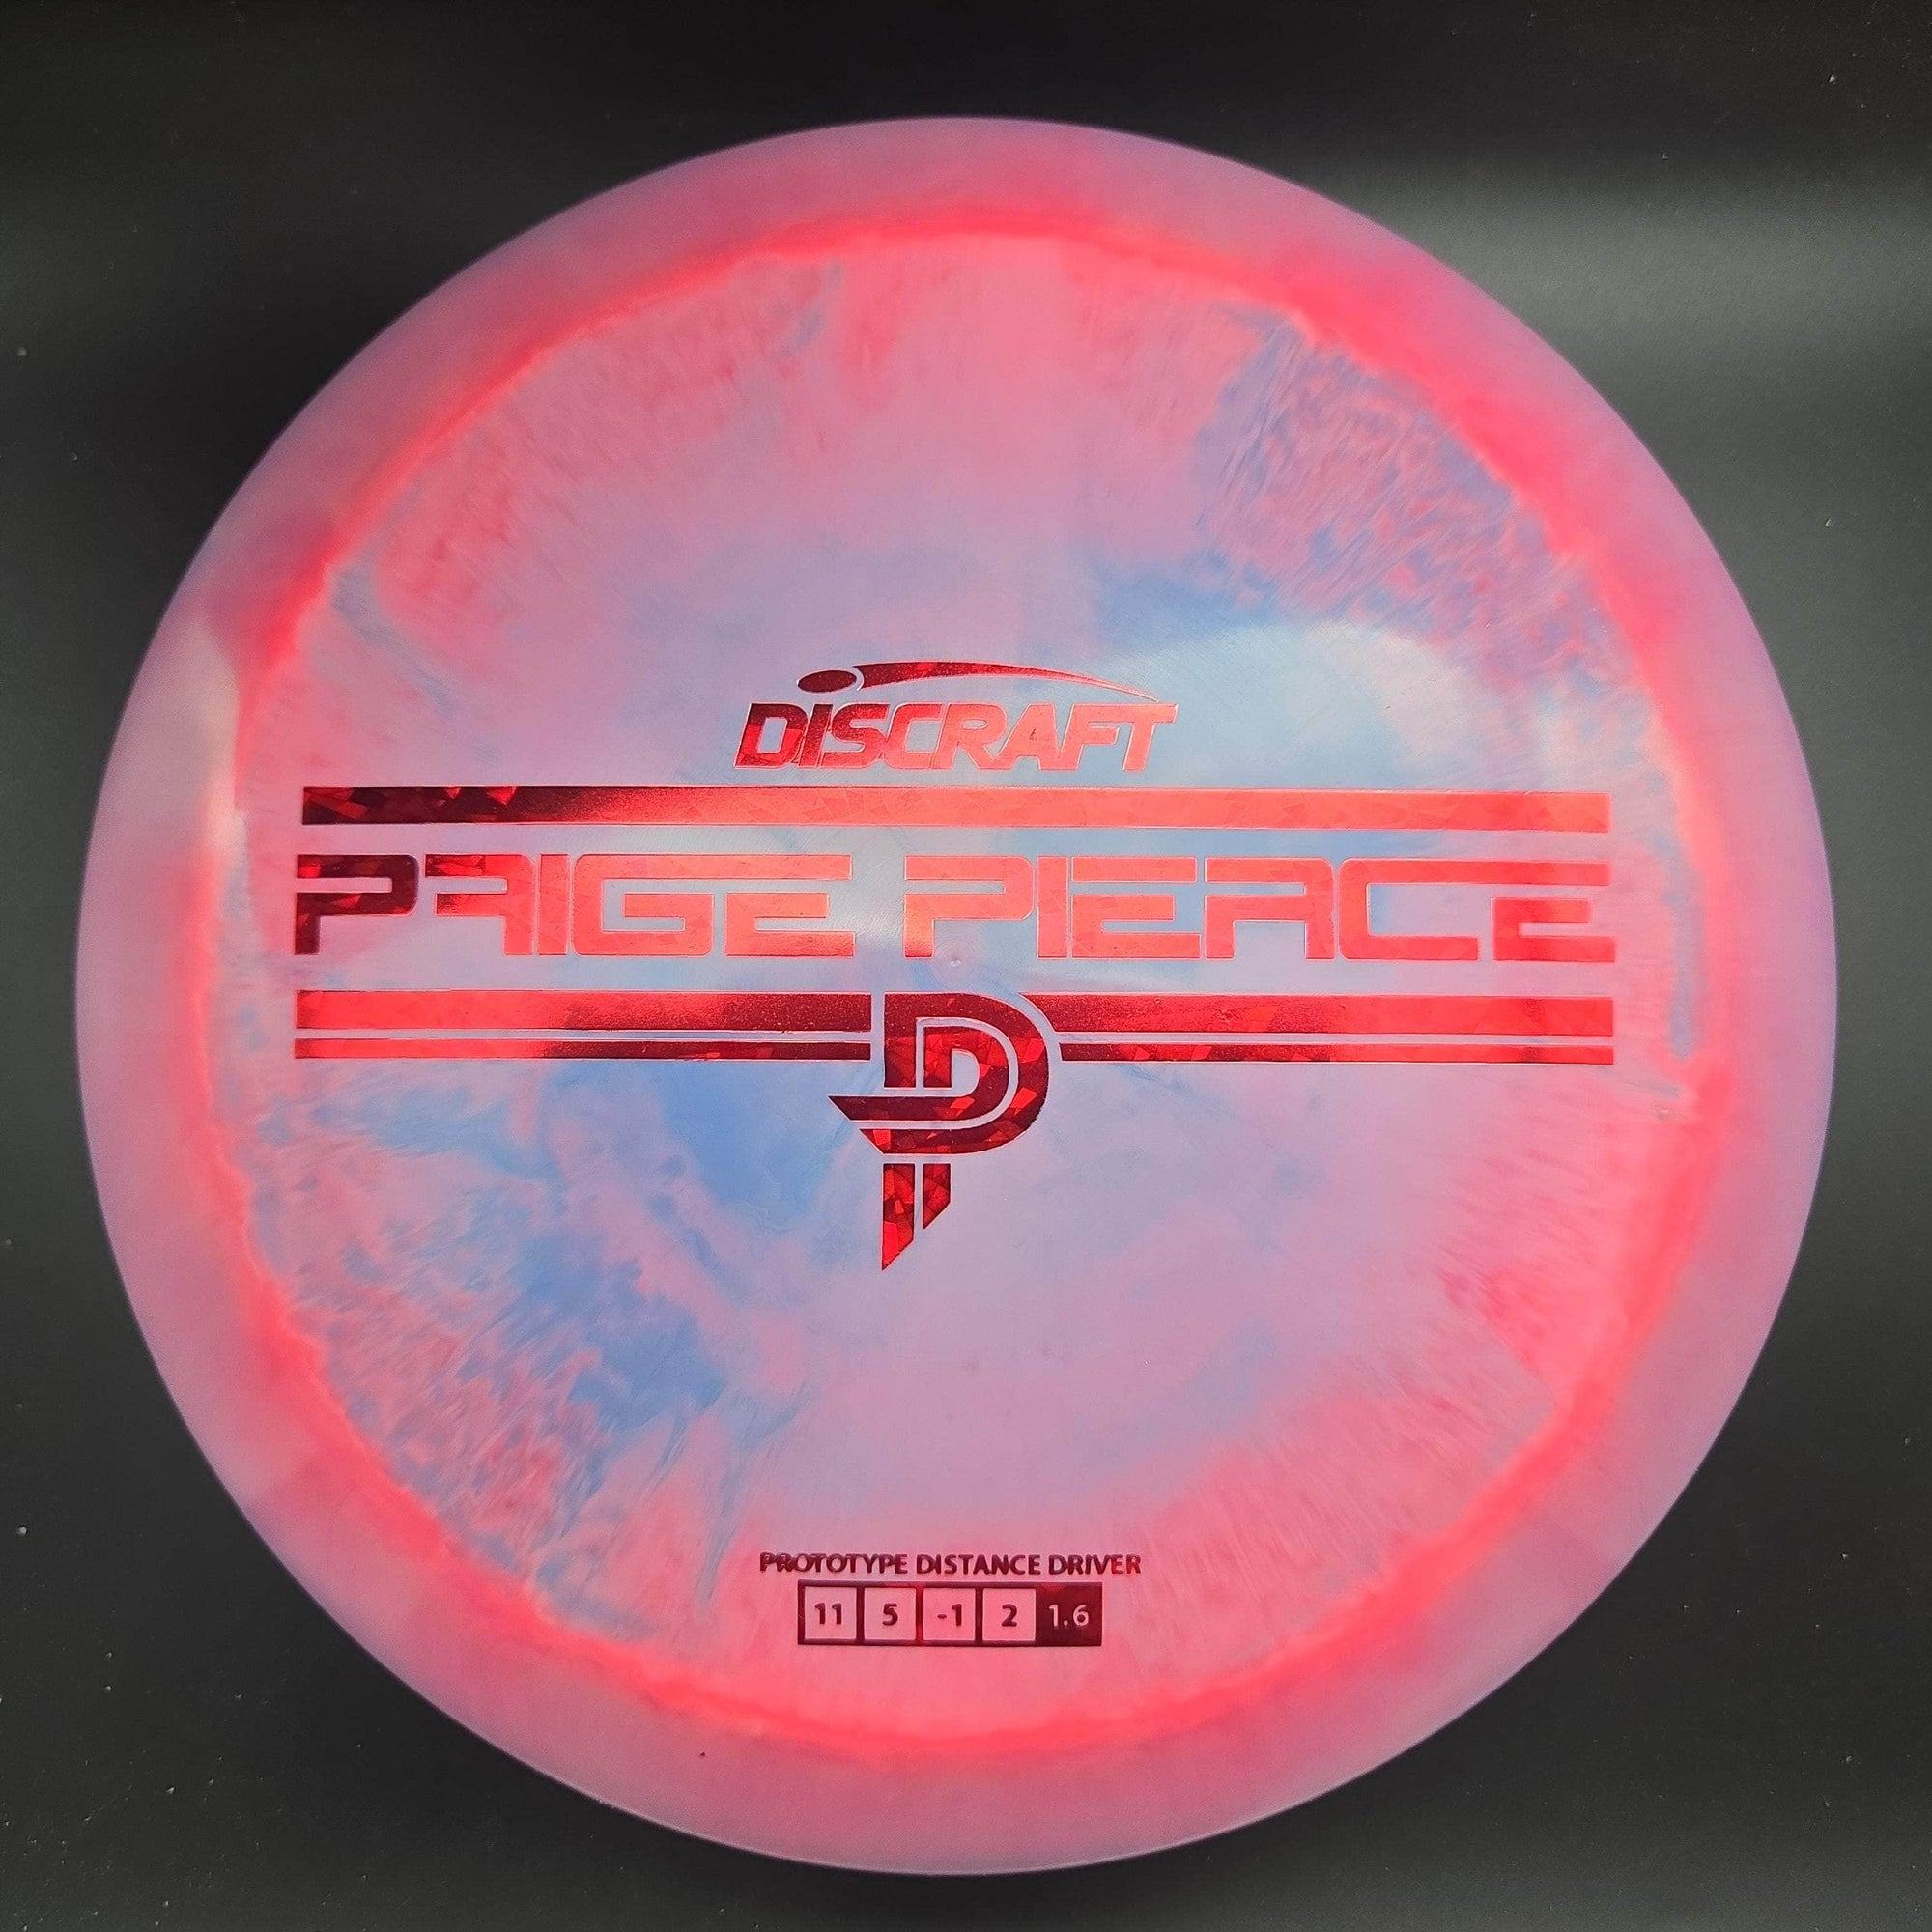 Discraft Distance Driver Red/Blue Red Shatter Stamp 174g Drive, ESP, Paige Pierce Prototype